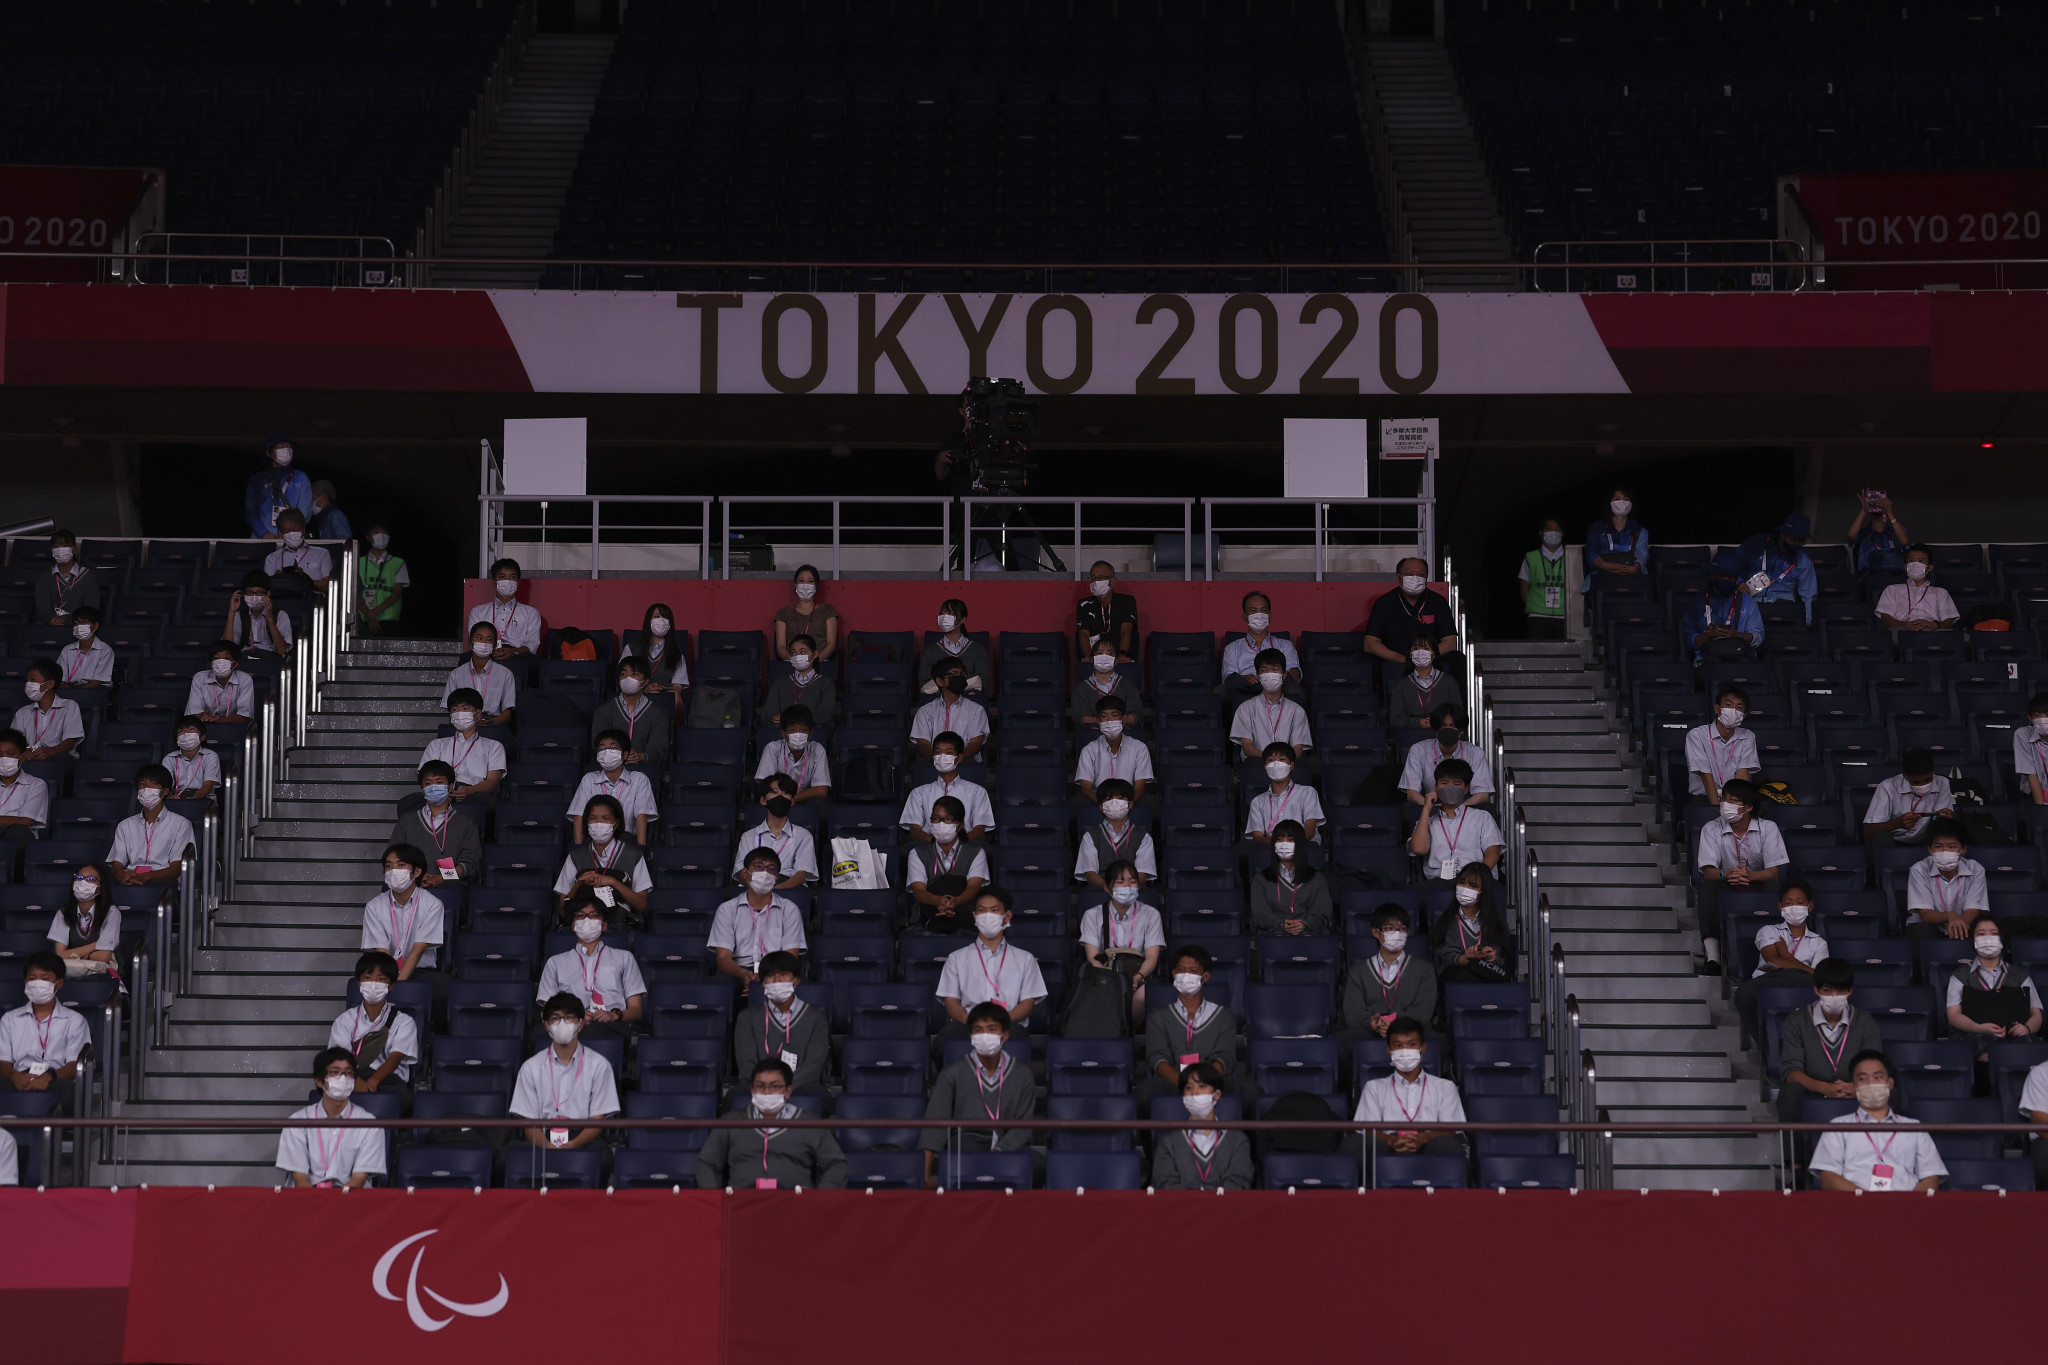 Despite the restrictions on crowds, students are being allowed to watch the action at the Tokyo 2020 Paralympics at some venues ©Getty Images

